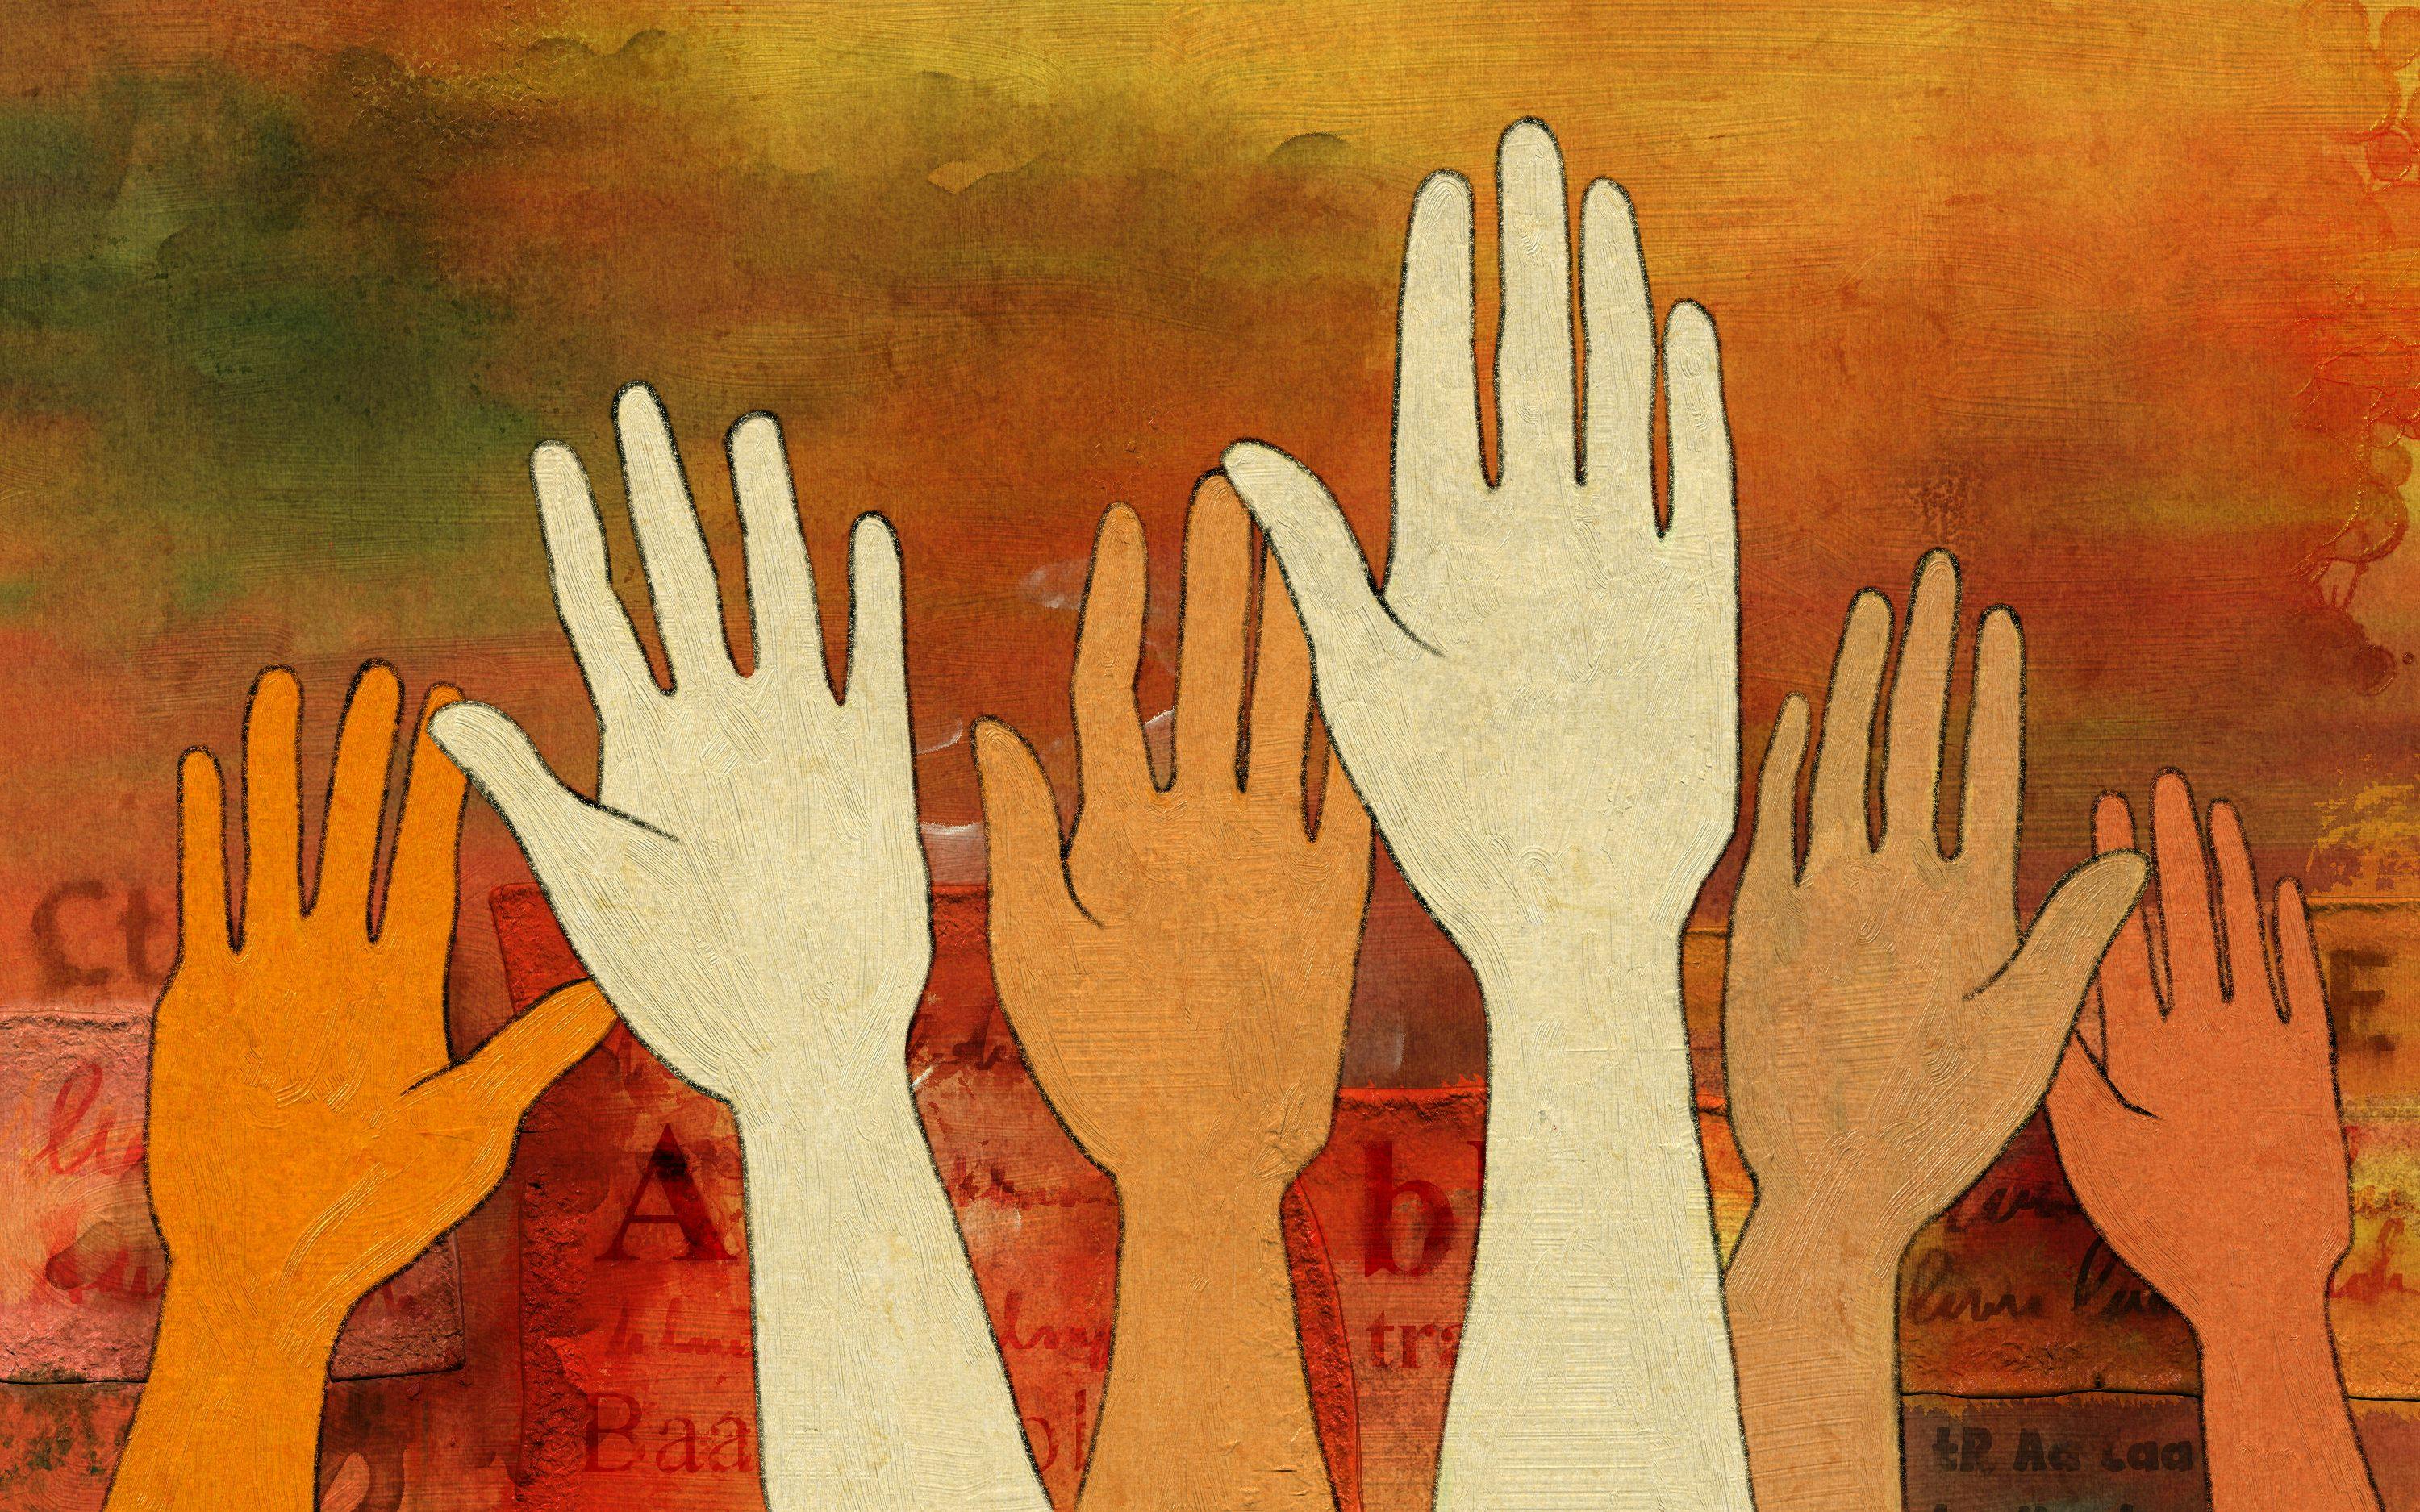 raised hands of different shades